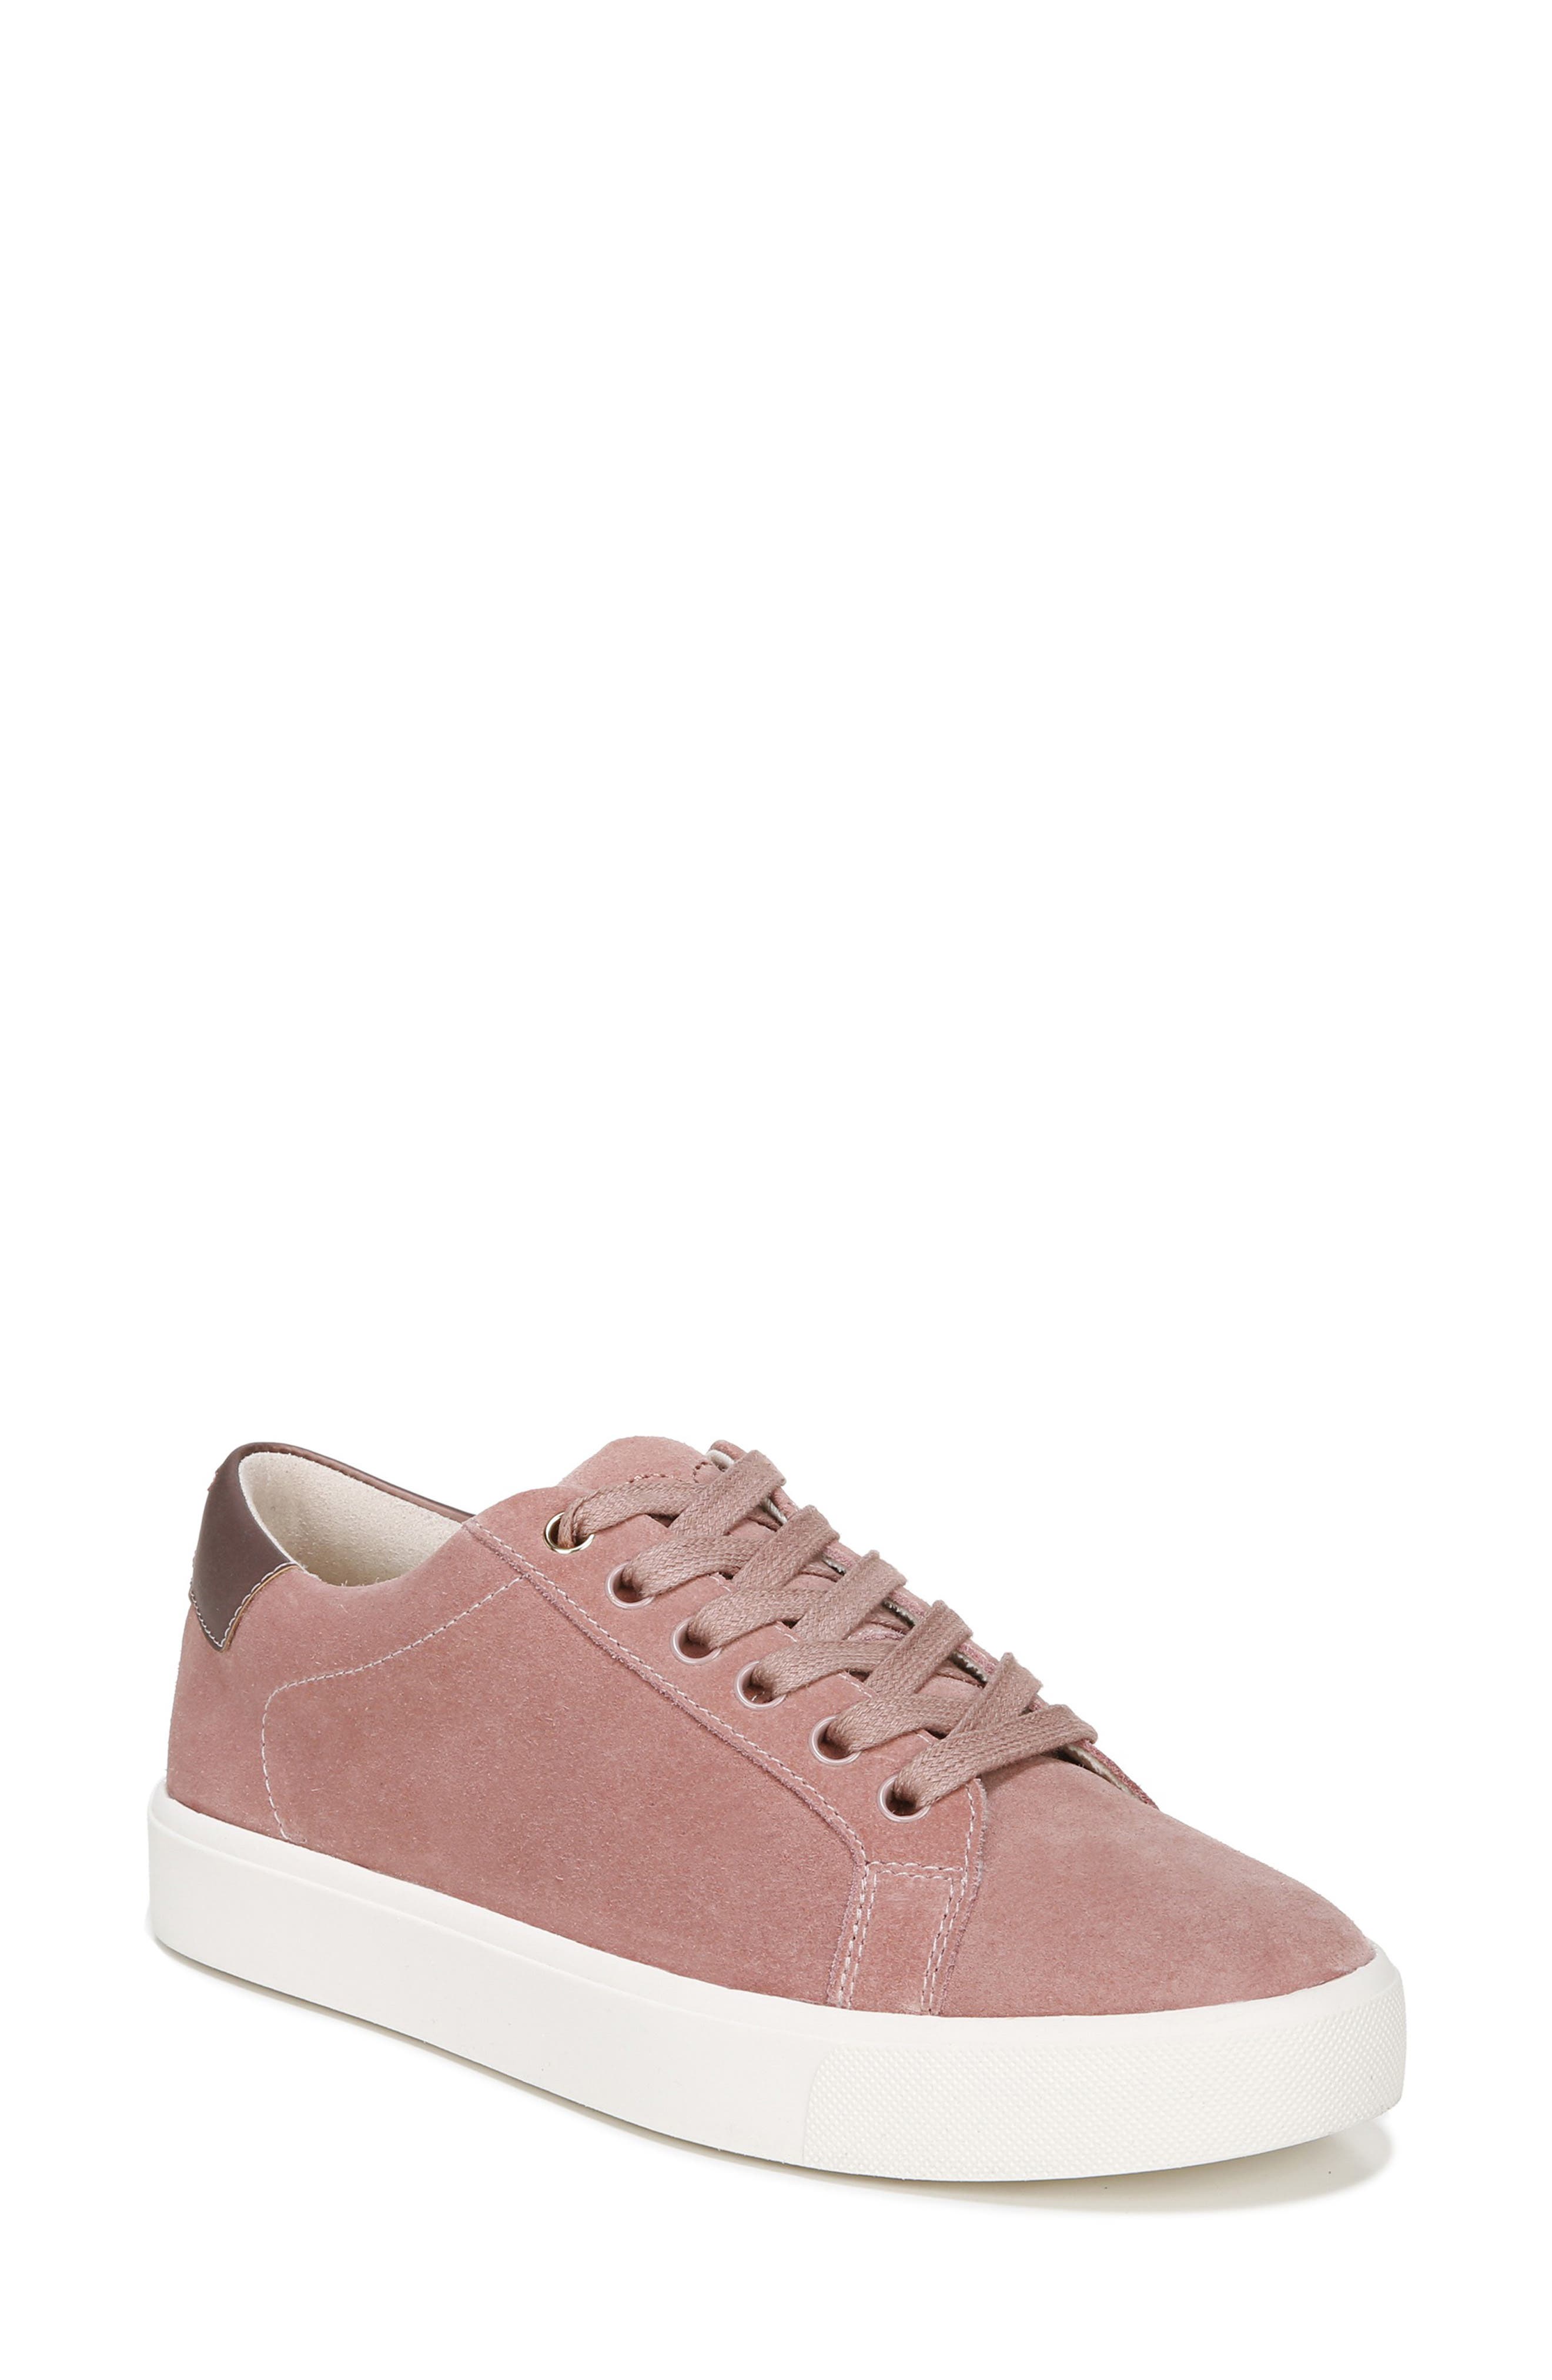 Sam Edelman Ethyl Suede Lace-up Sneaker In Cameo Pink Suede